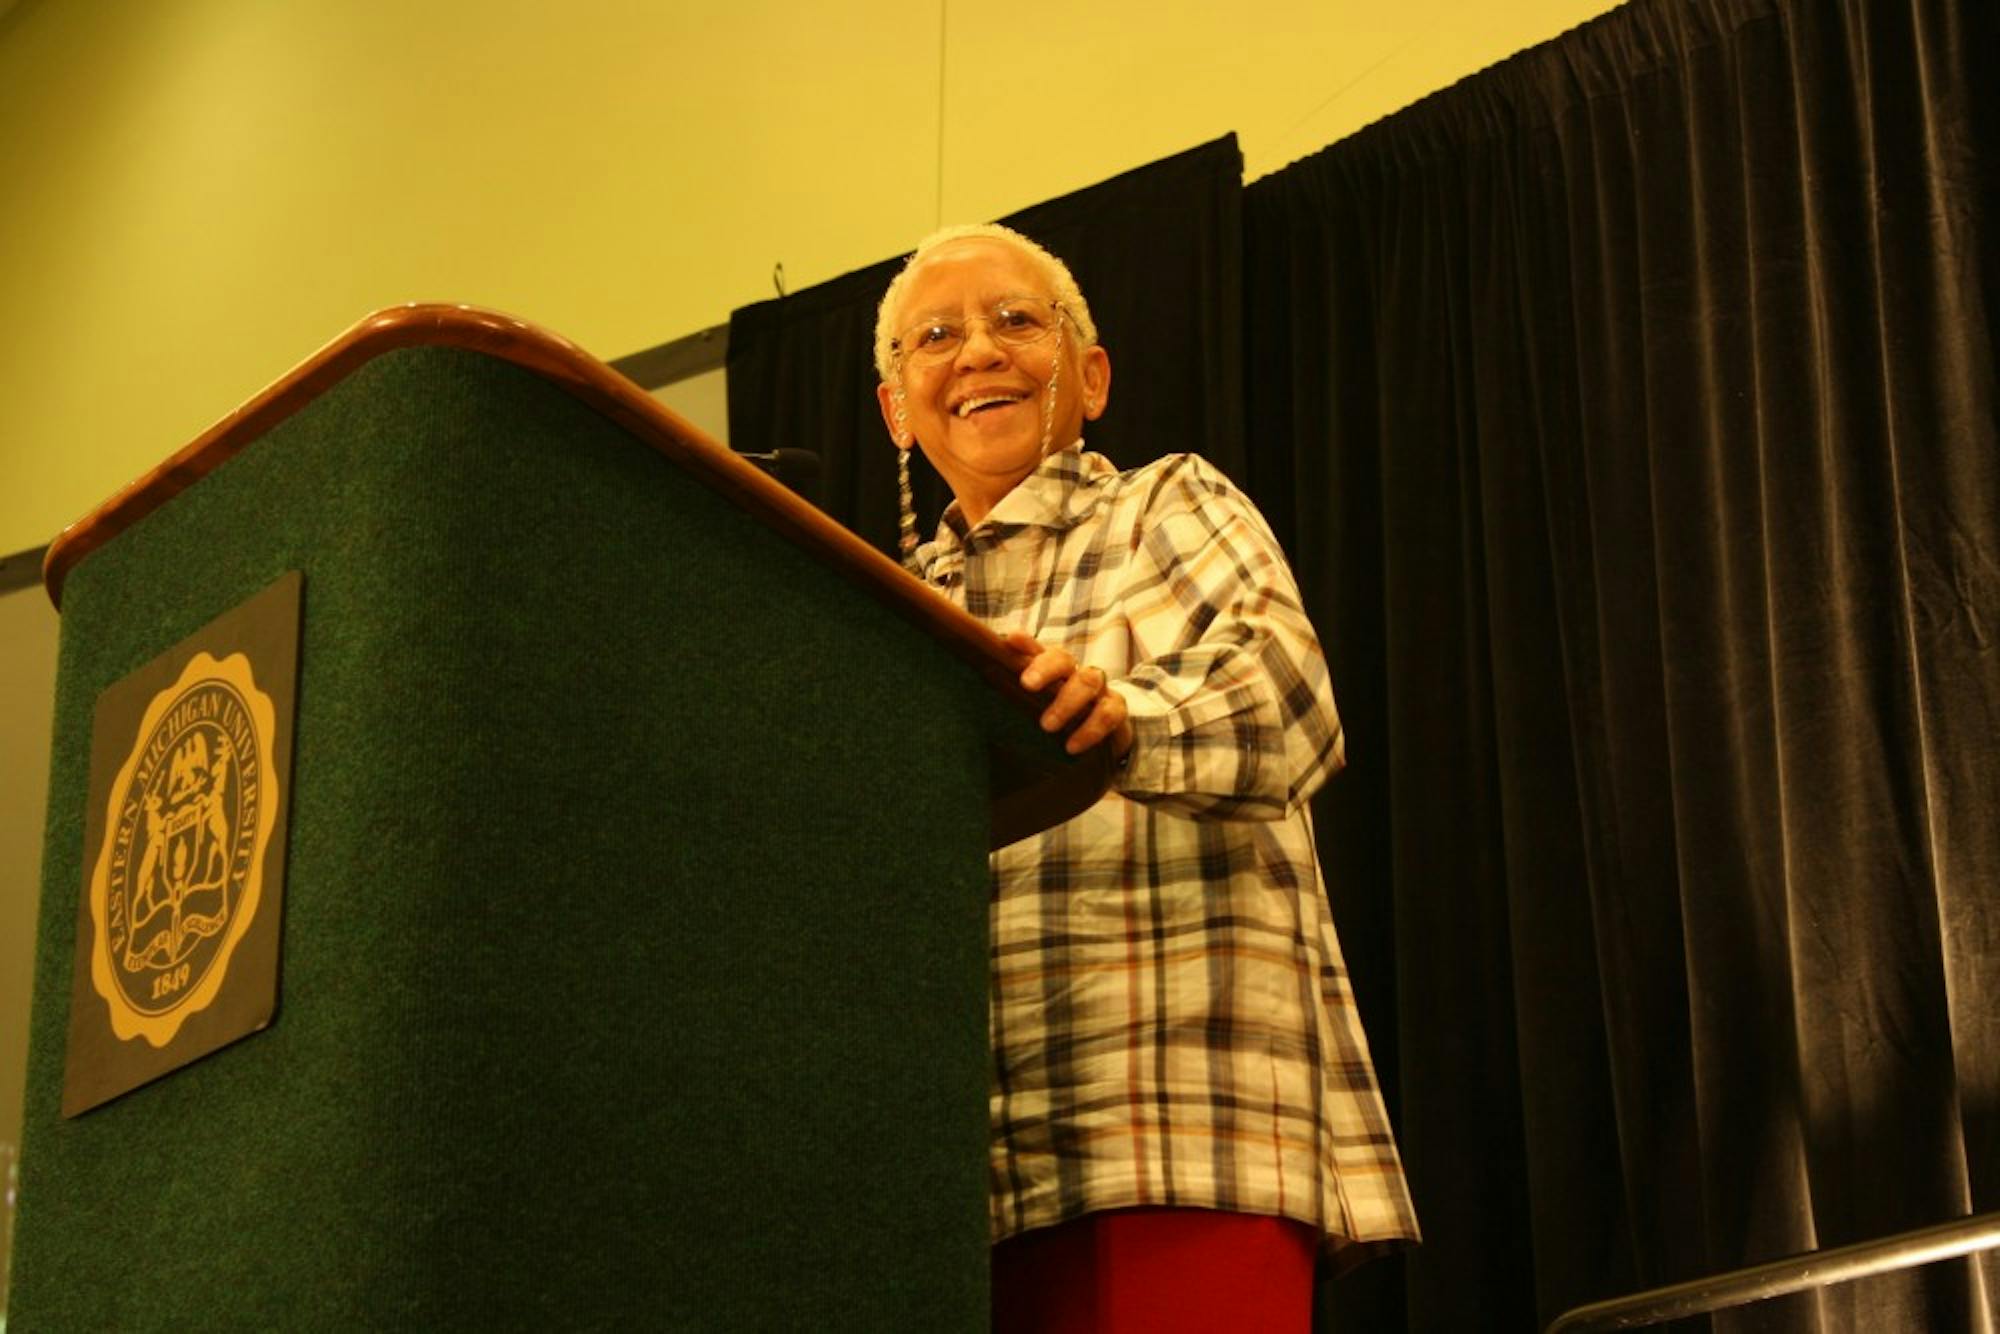 	Nikki Giovanni, a writer, poet and activist, spoke and held a book signing Wednesday at the Student Center. She was also named “an honorary Eagle for a day” at the event.